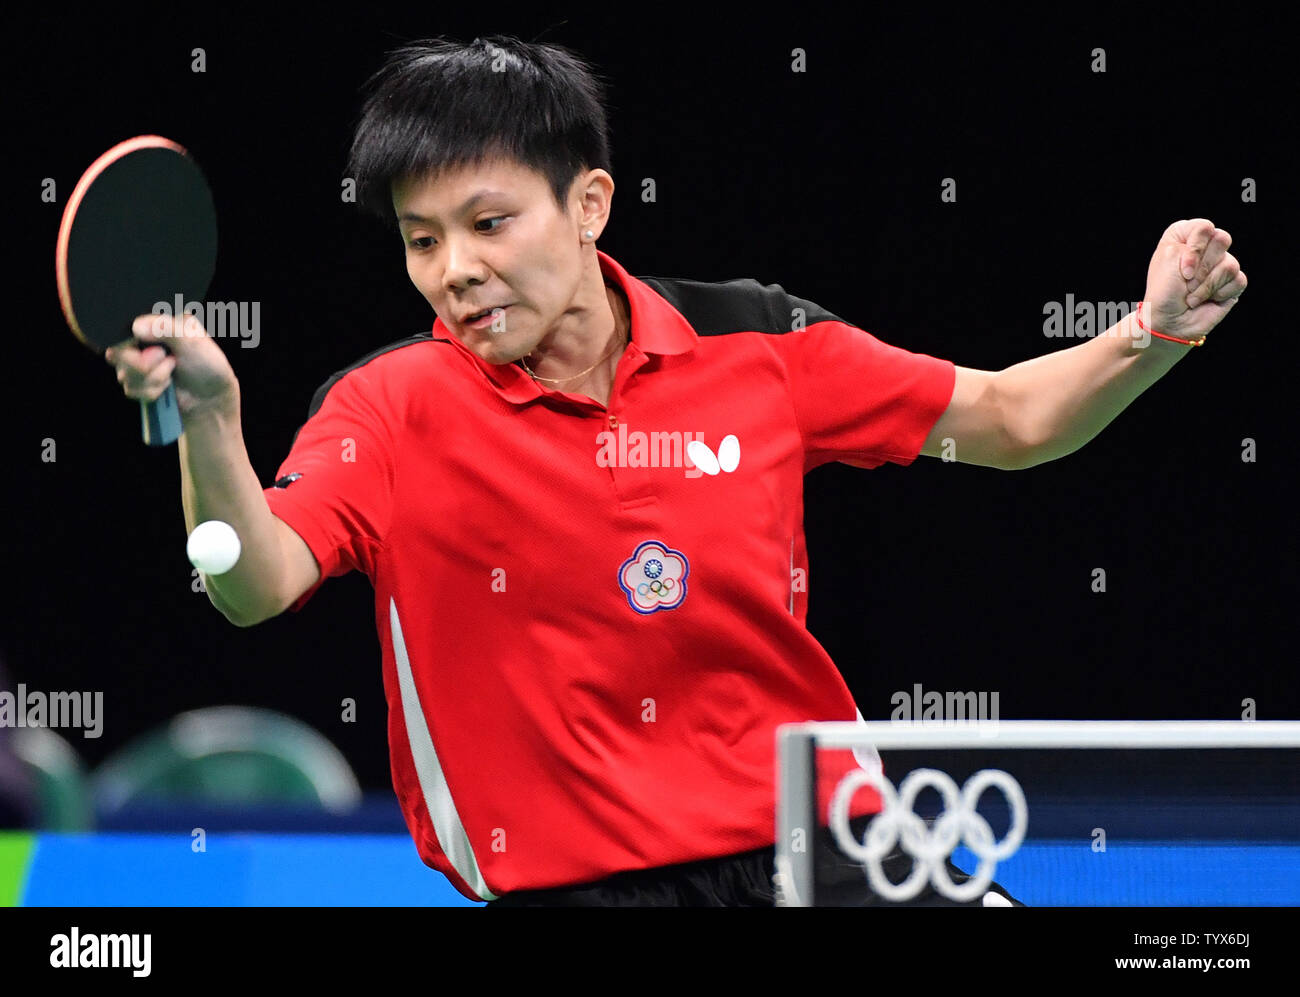 Chinese Taipei's Cheng I-Ching returns the ball in her table tennis match against South Korea's Hyowon Suh at the 2016 Rio Summer Olympics in Rio de Janeiro, Brazil, August 8, 2016. Photo by Kevin Dietsch/UPI Stock Photo